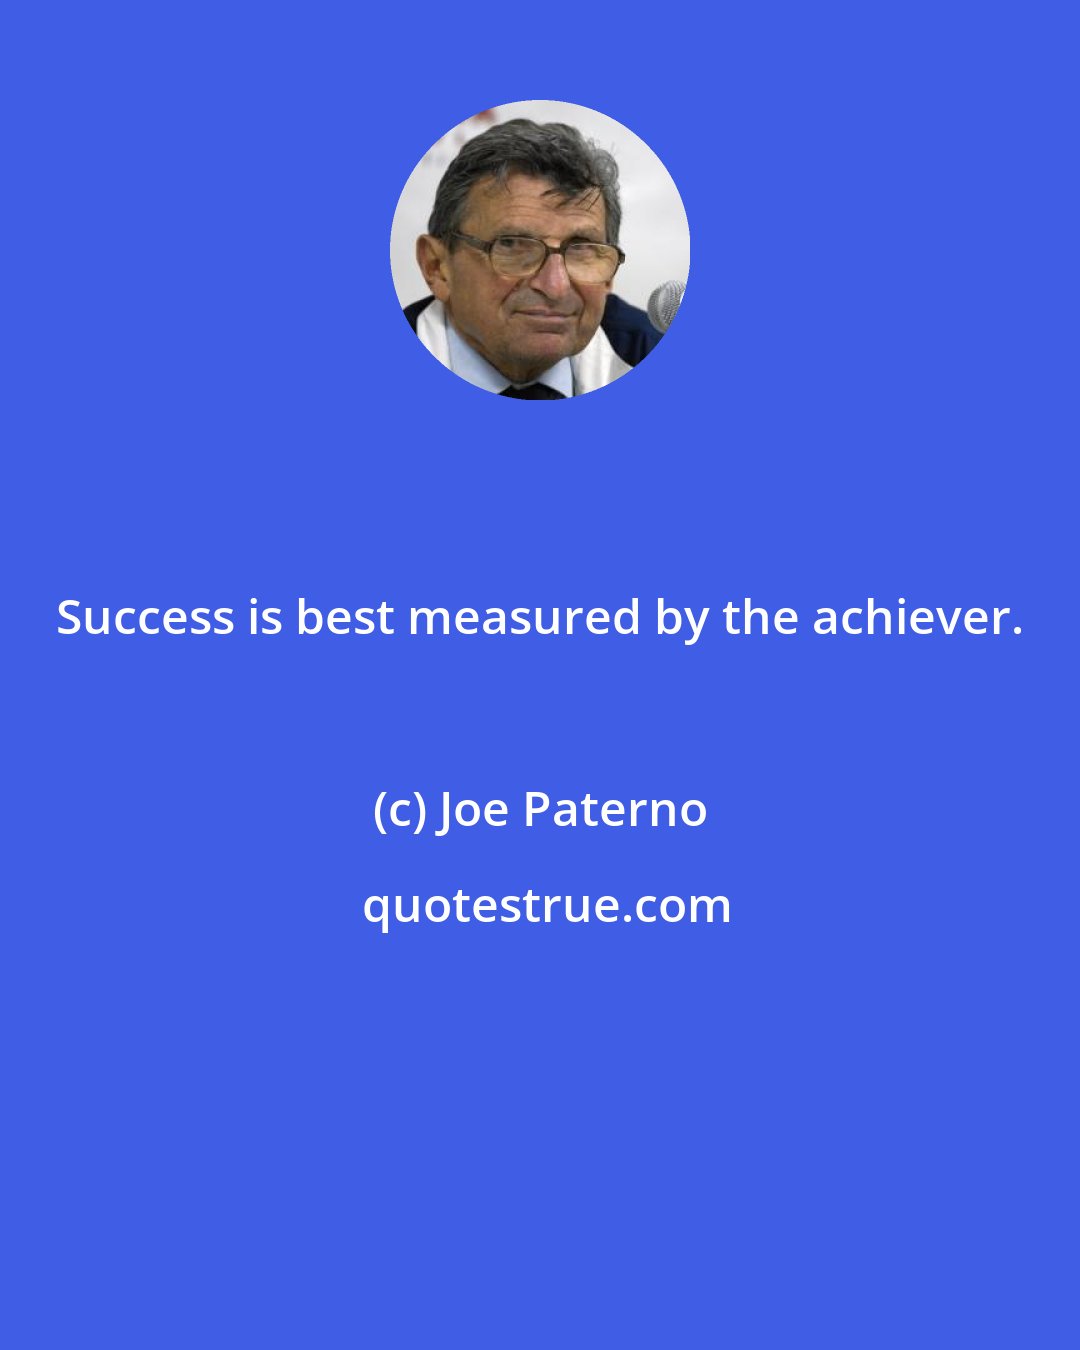 Joe Paterno: Success is best measured by the achiever.